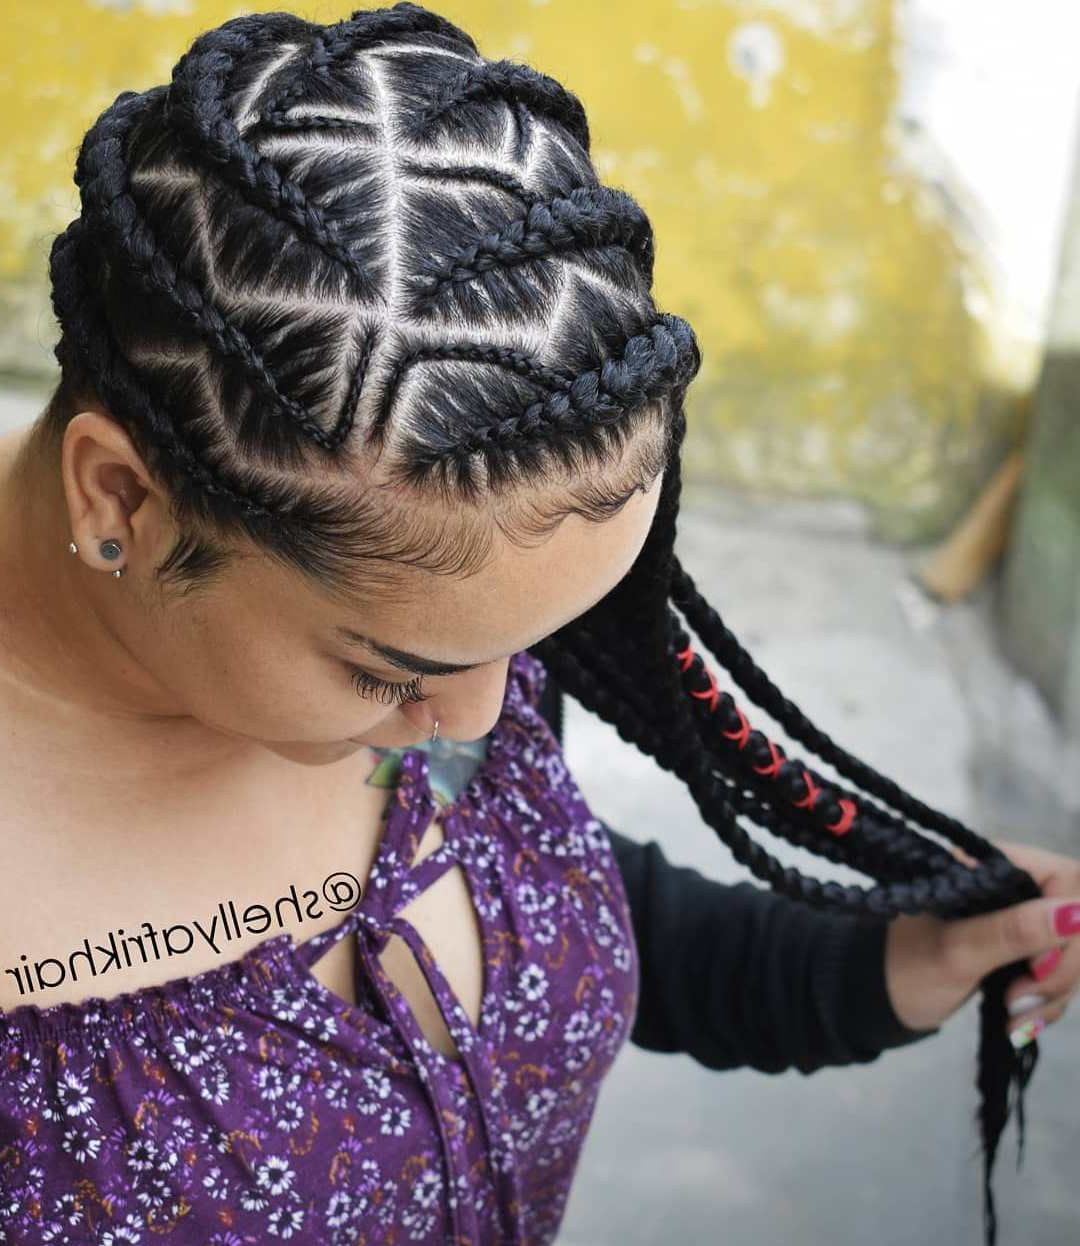 20 Head Turning Lemonade Braid Styles For All Ages Inside 2020 Thin And Thick Cornrows Under Braid Hairstyles (View 8 of 20)